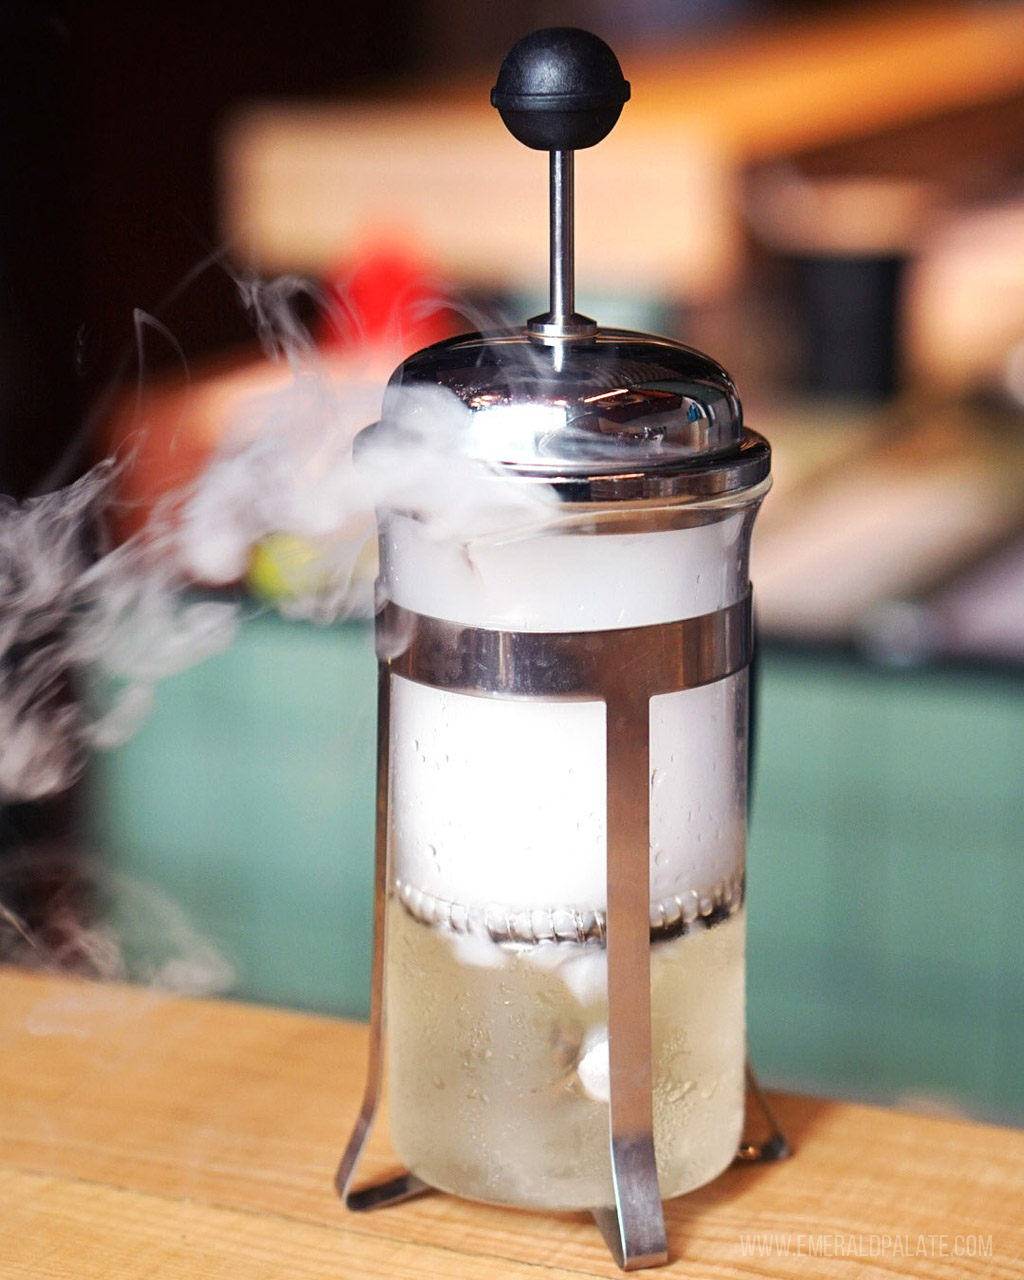 smoke coming out of a coffee French press